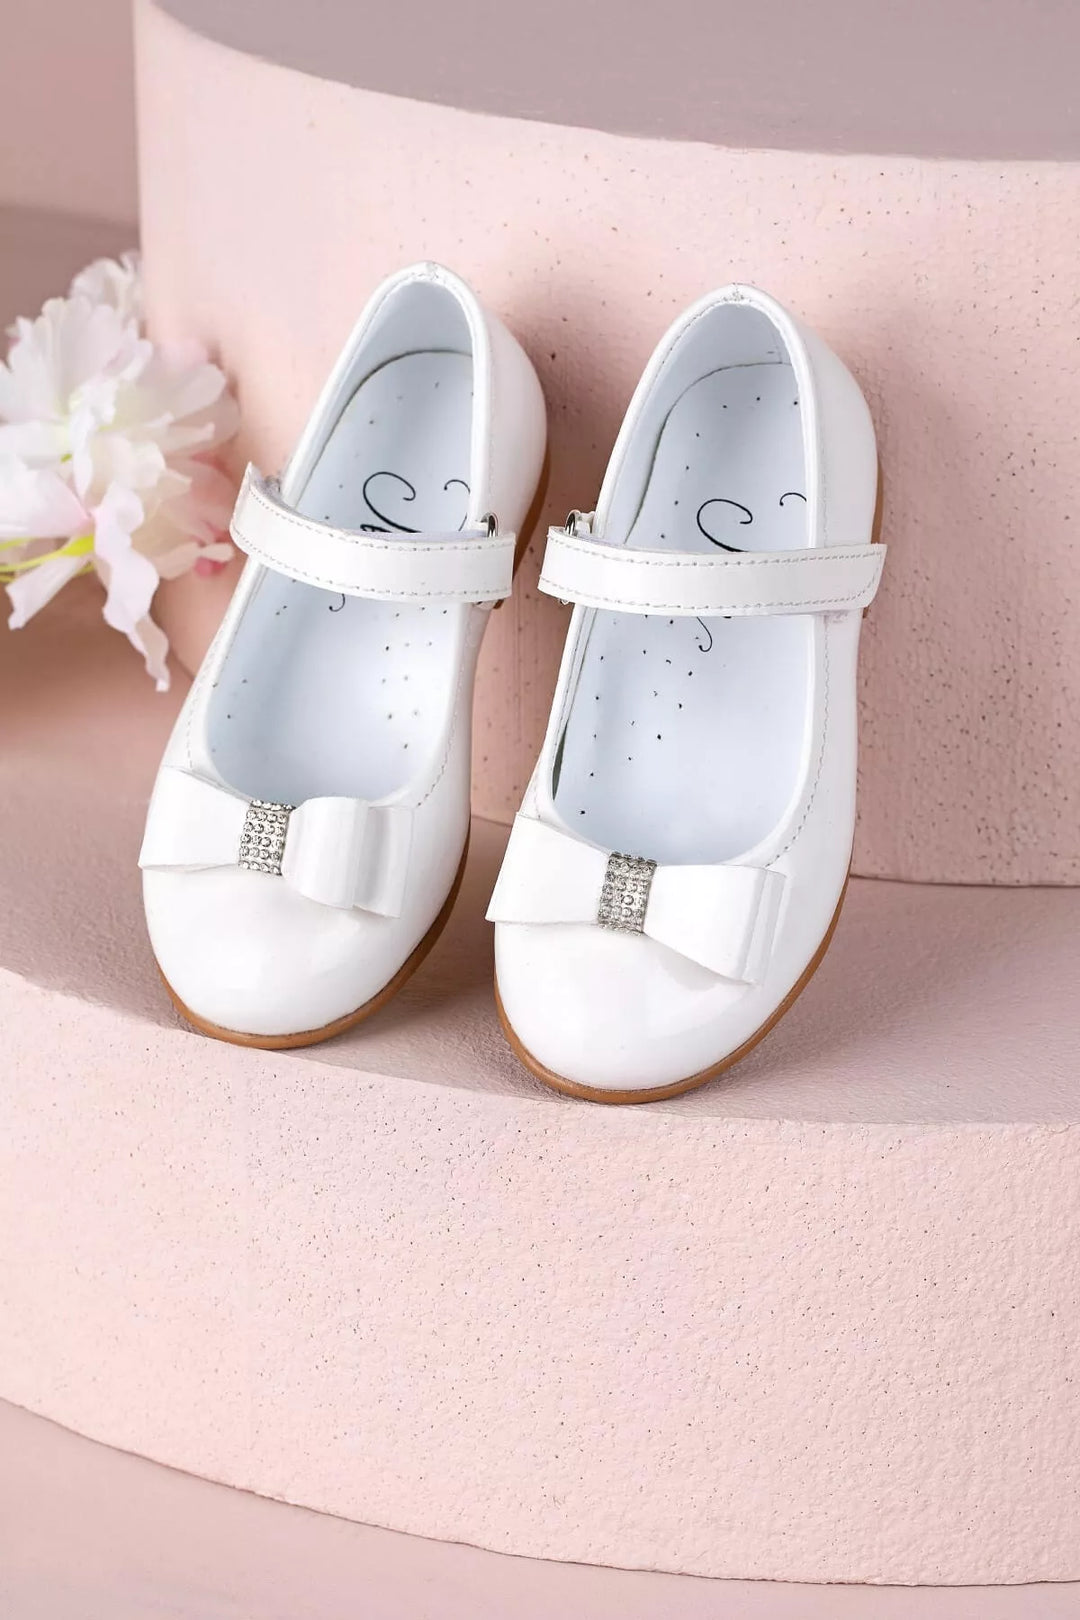 White toddler shoes that have crystal stone ornaments and bow tie